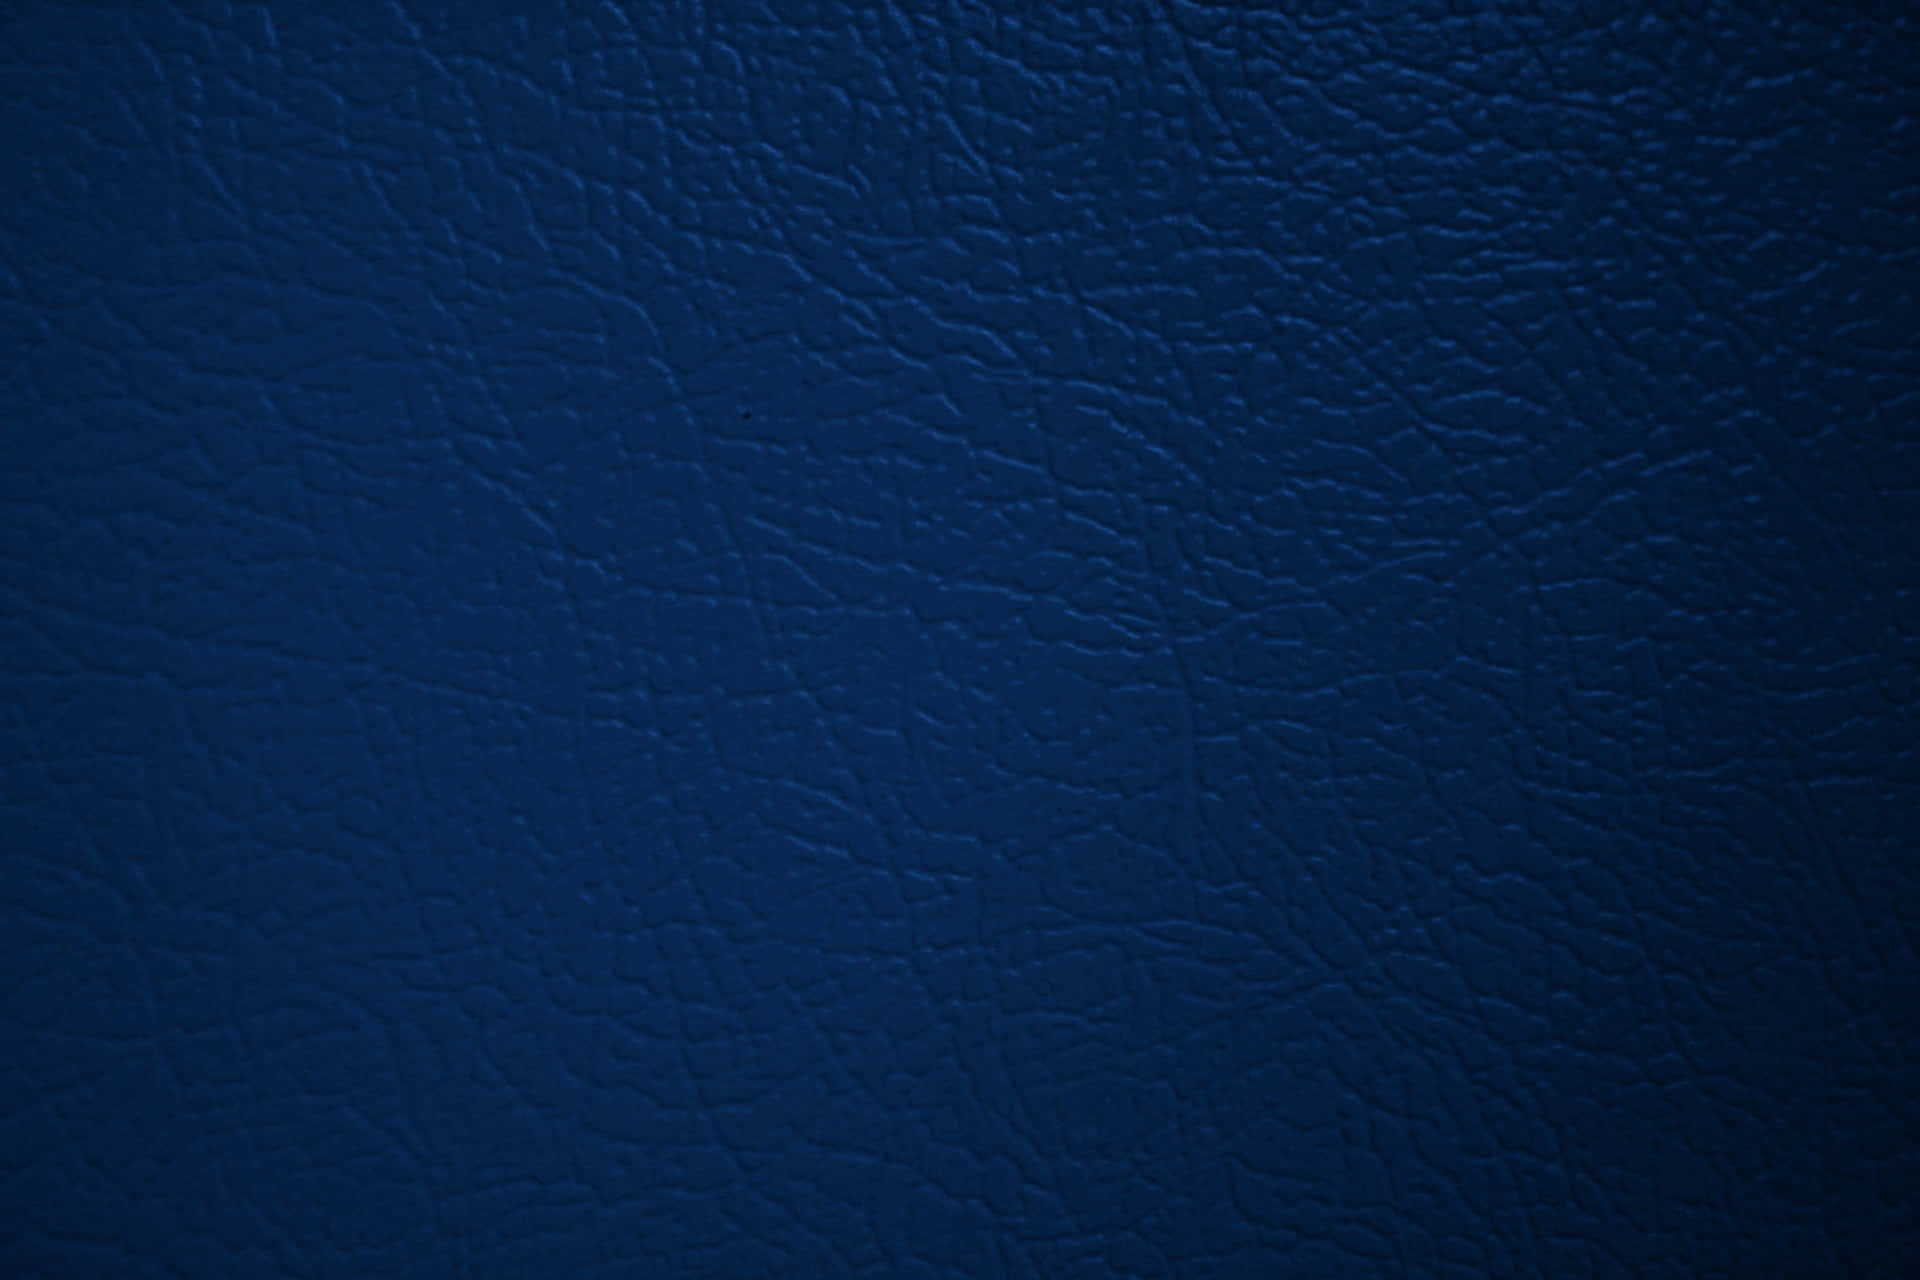 Luxurious Royal Blue Leather Texture Wallpaper